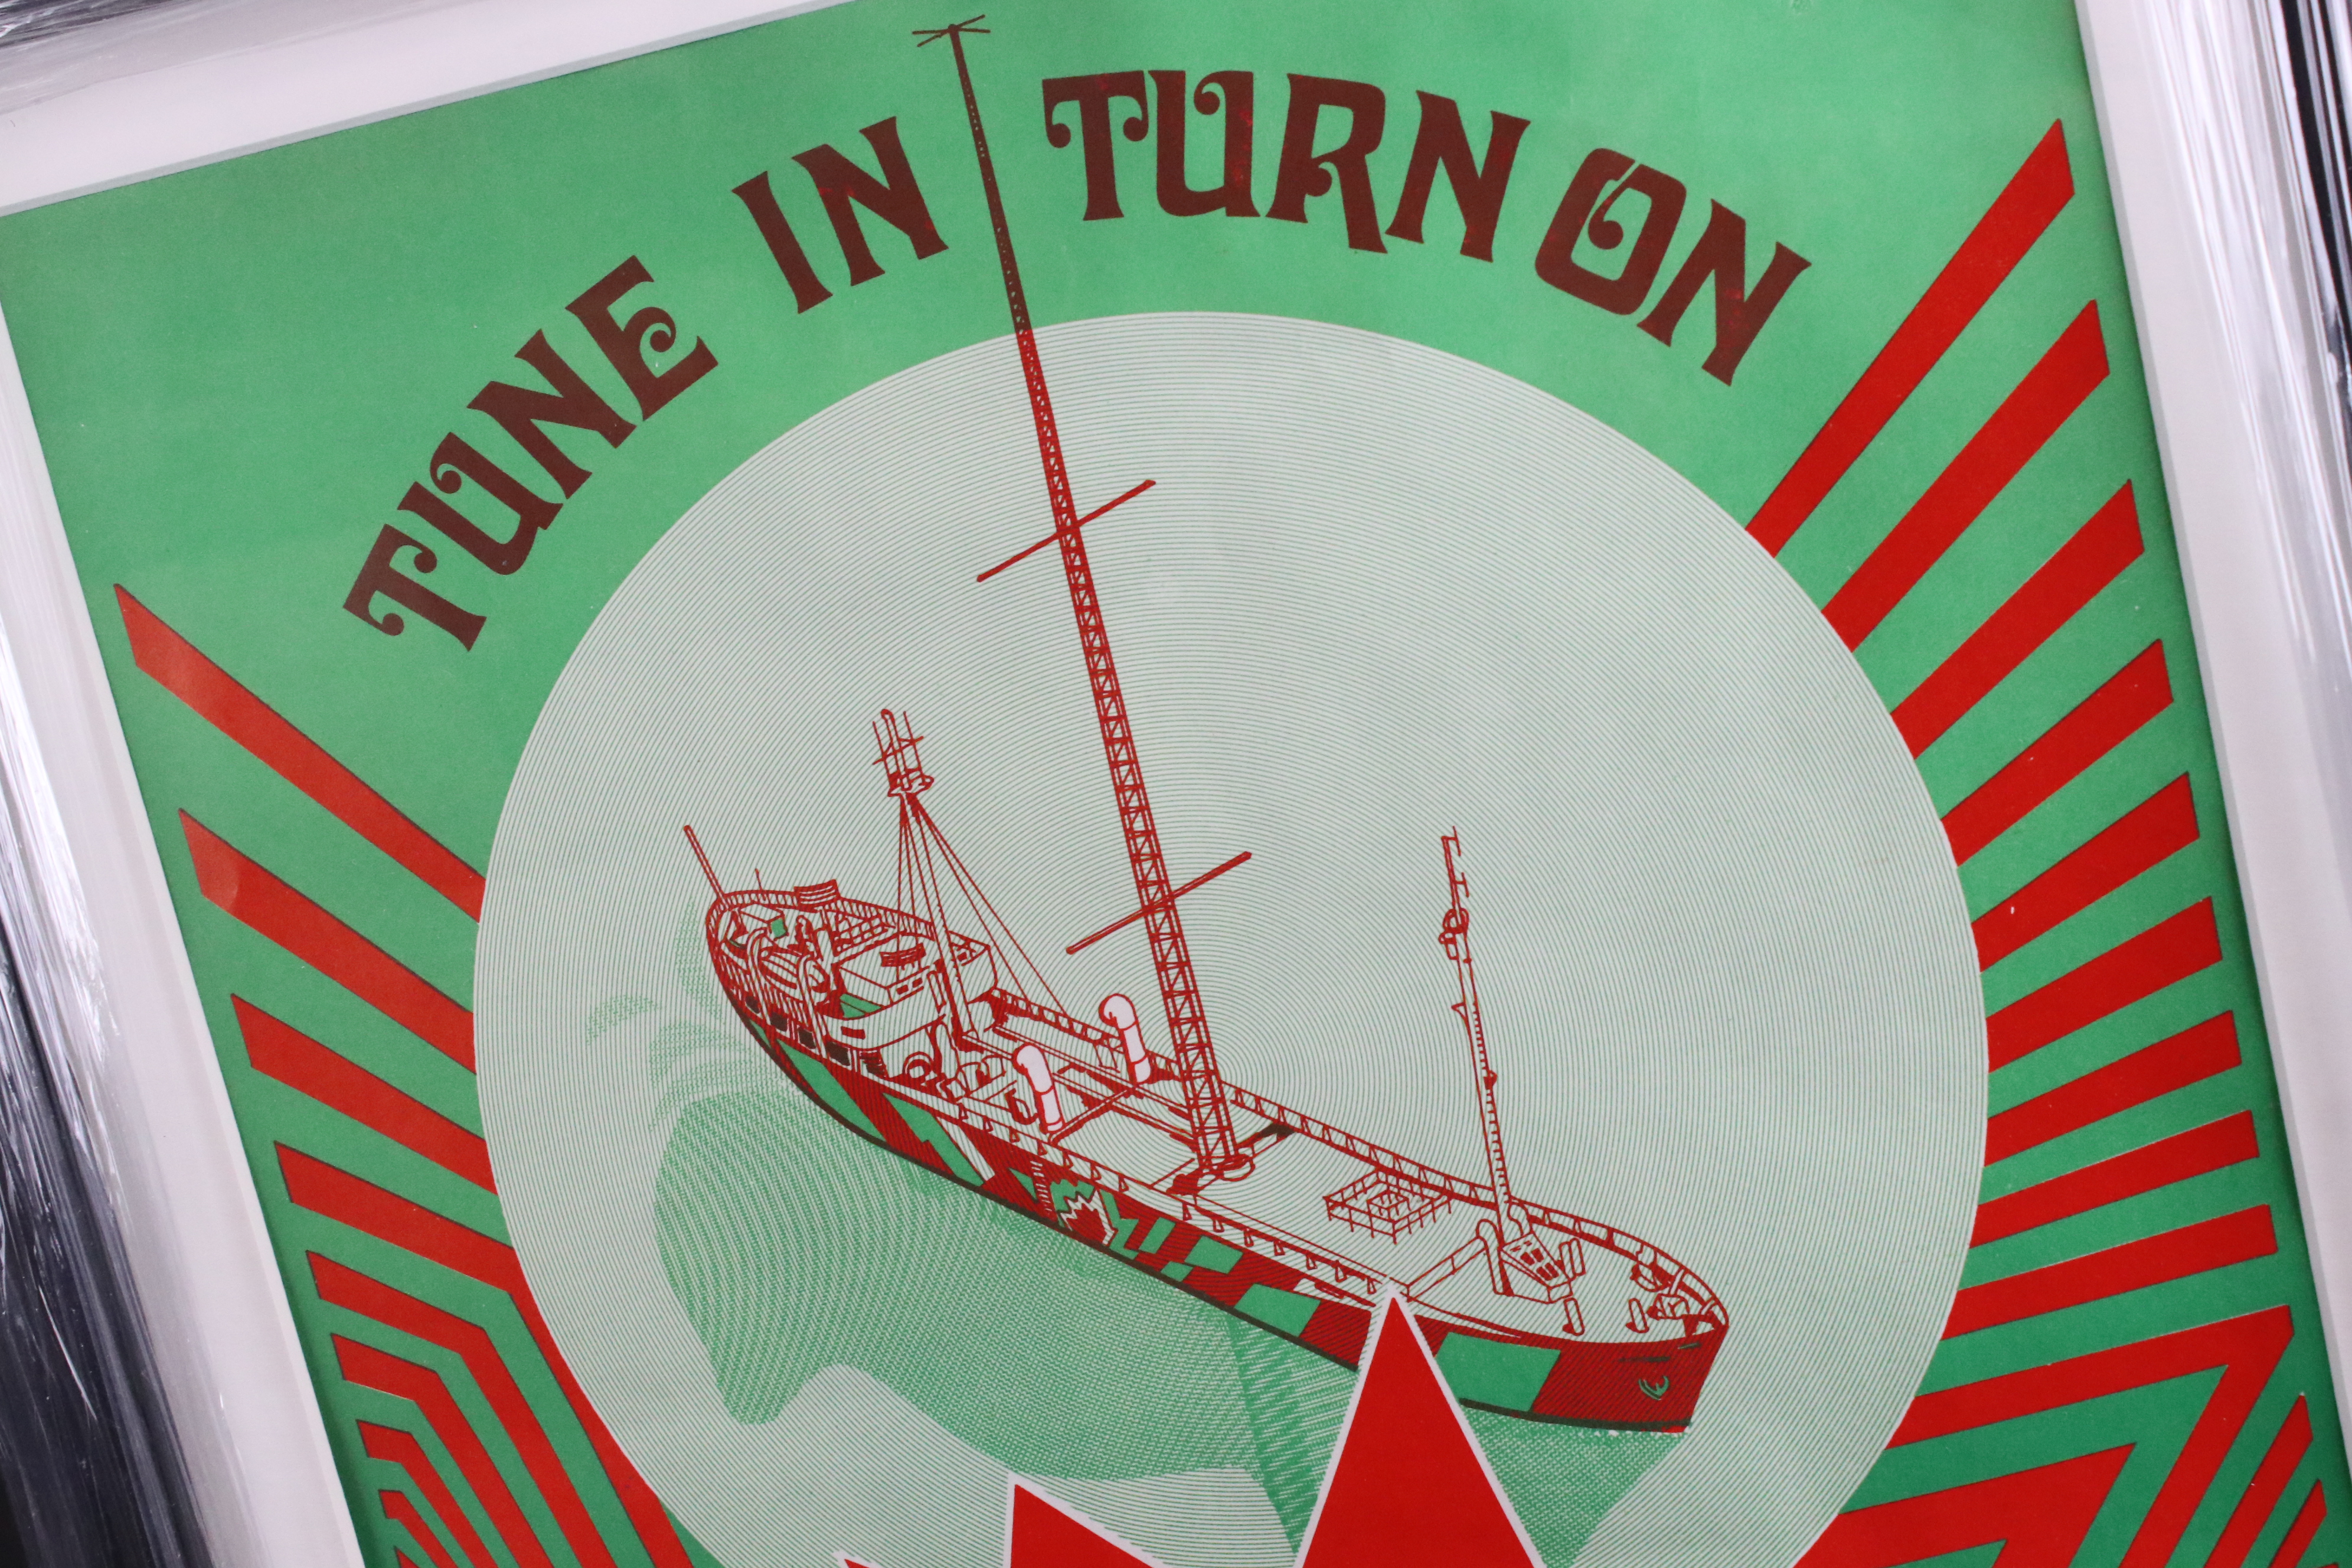 Music Memorabilia - Tune In Turn On promotional poster for Radio Nordsee International (RNI / - Image 3 of 3